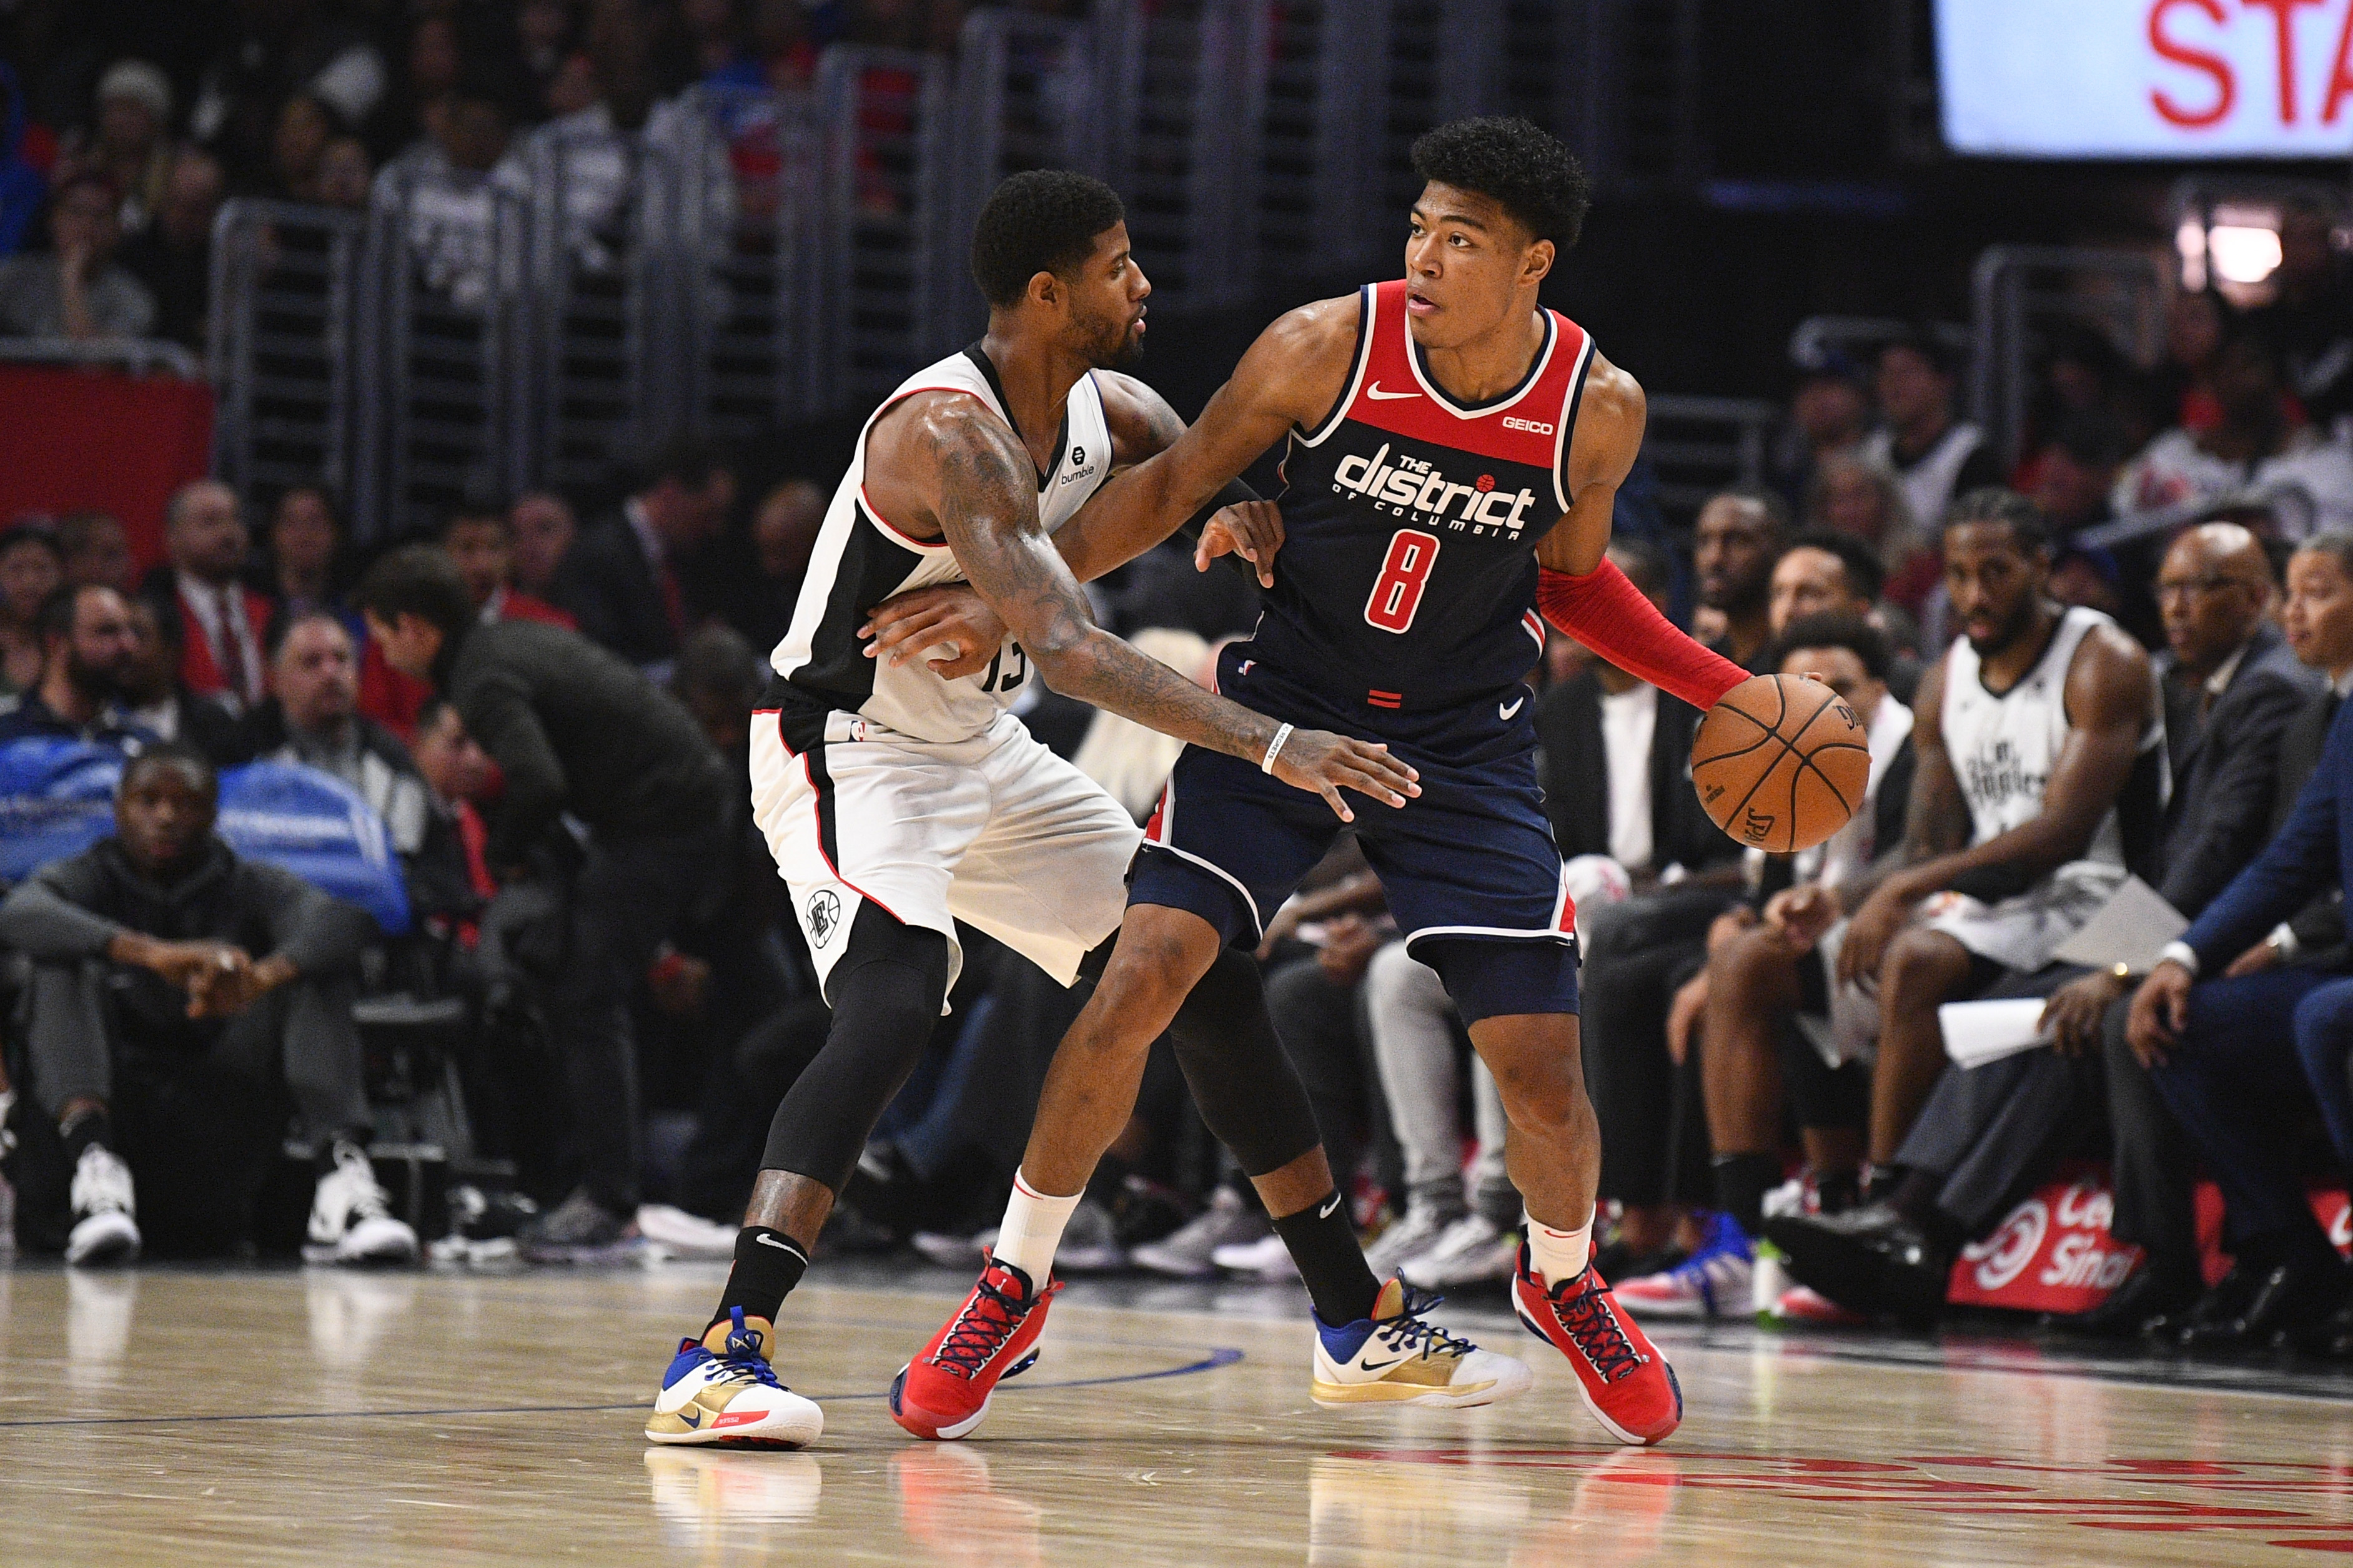 NBA: DEC 01 Wizards at Clippers